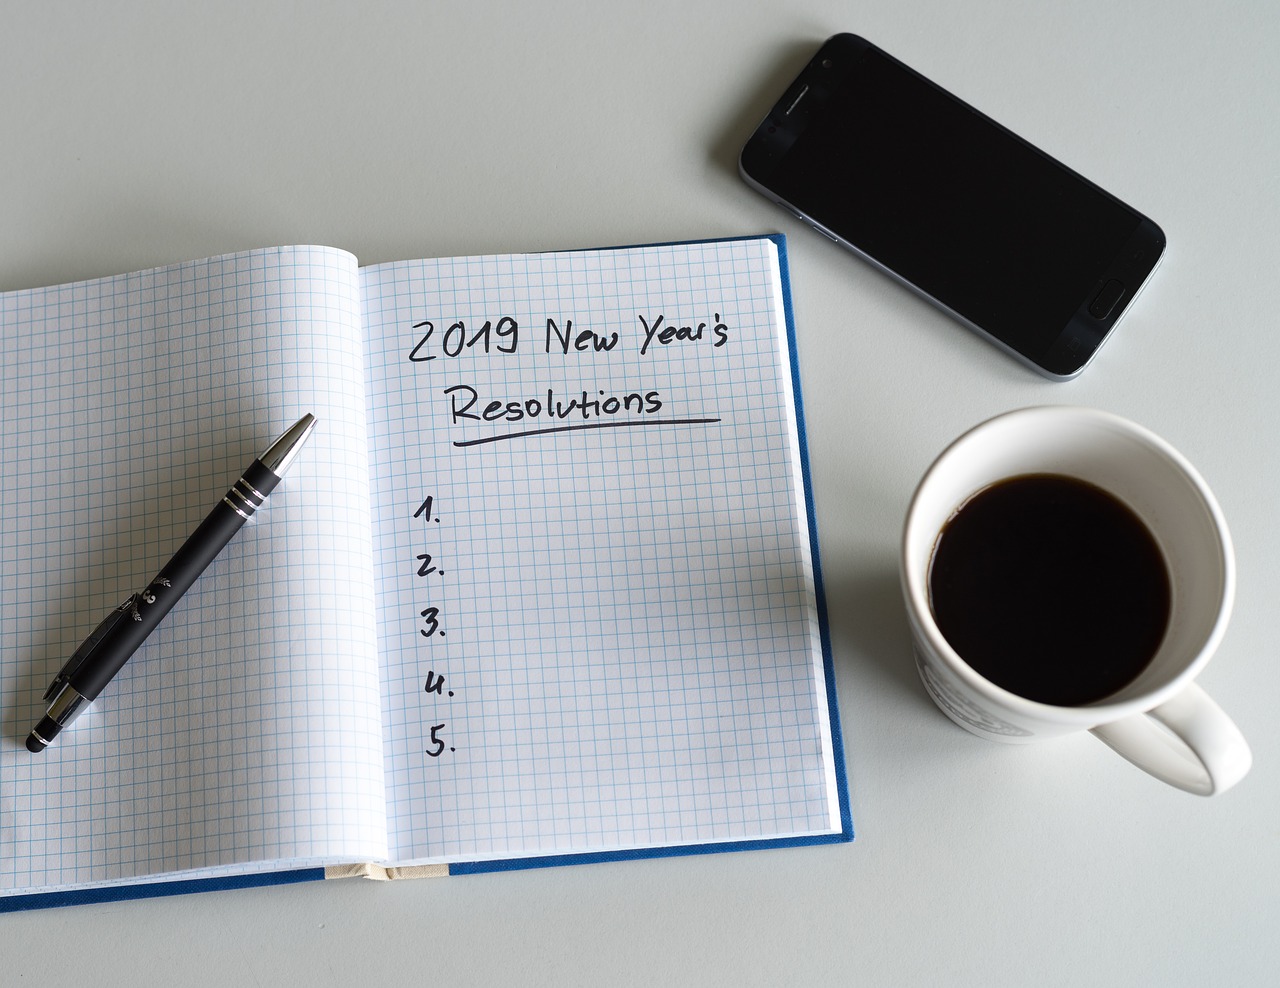 new year’s resolutions, a new year resolutions, new year resolutions list, new year’s resolutions 2018, new year's resolutions 2018, new year's resolutions in english, new year new resolutions 